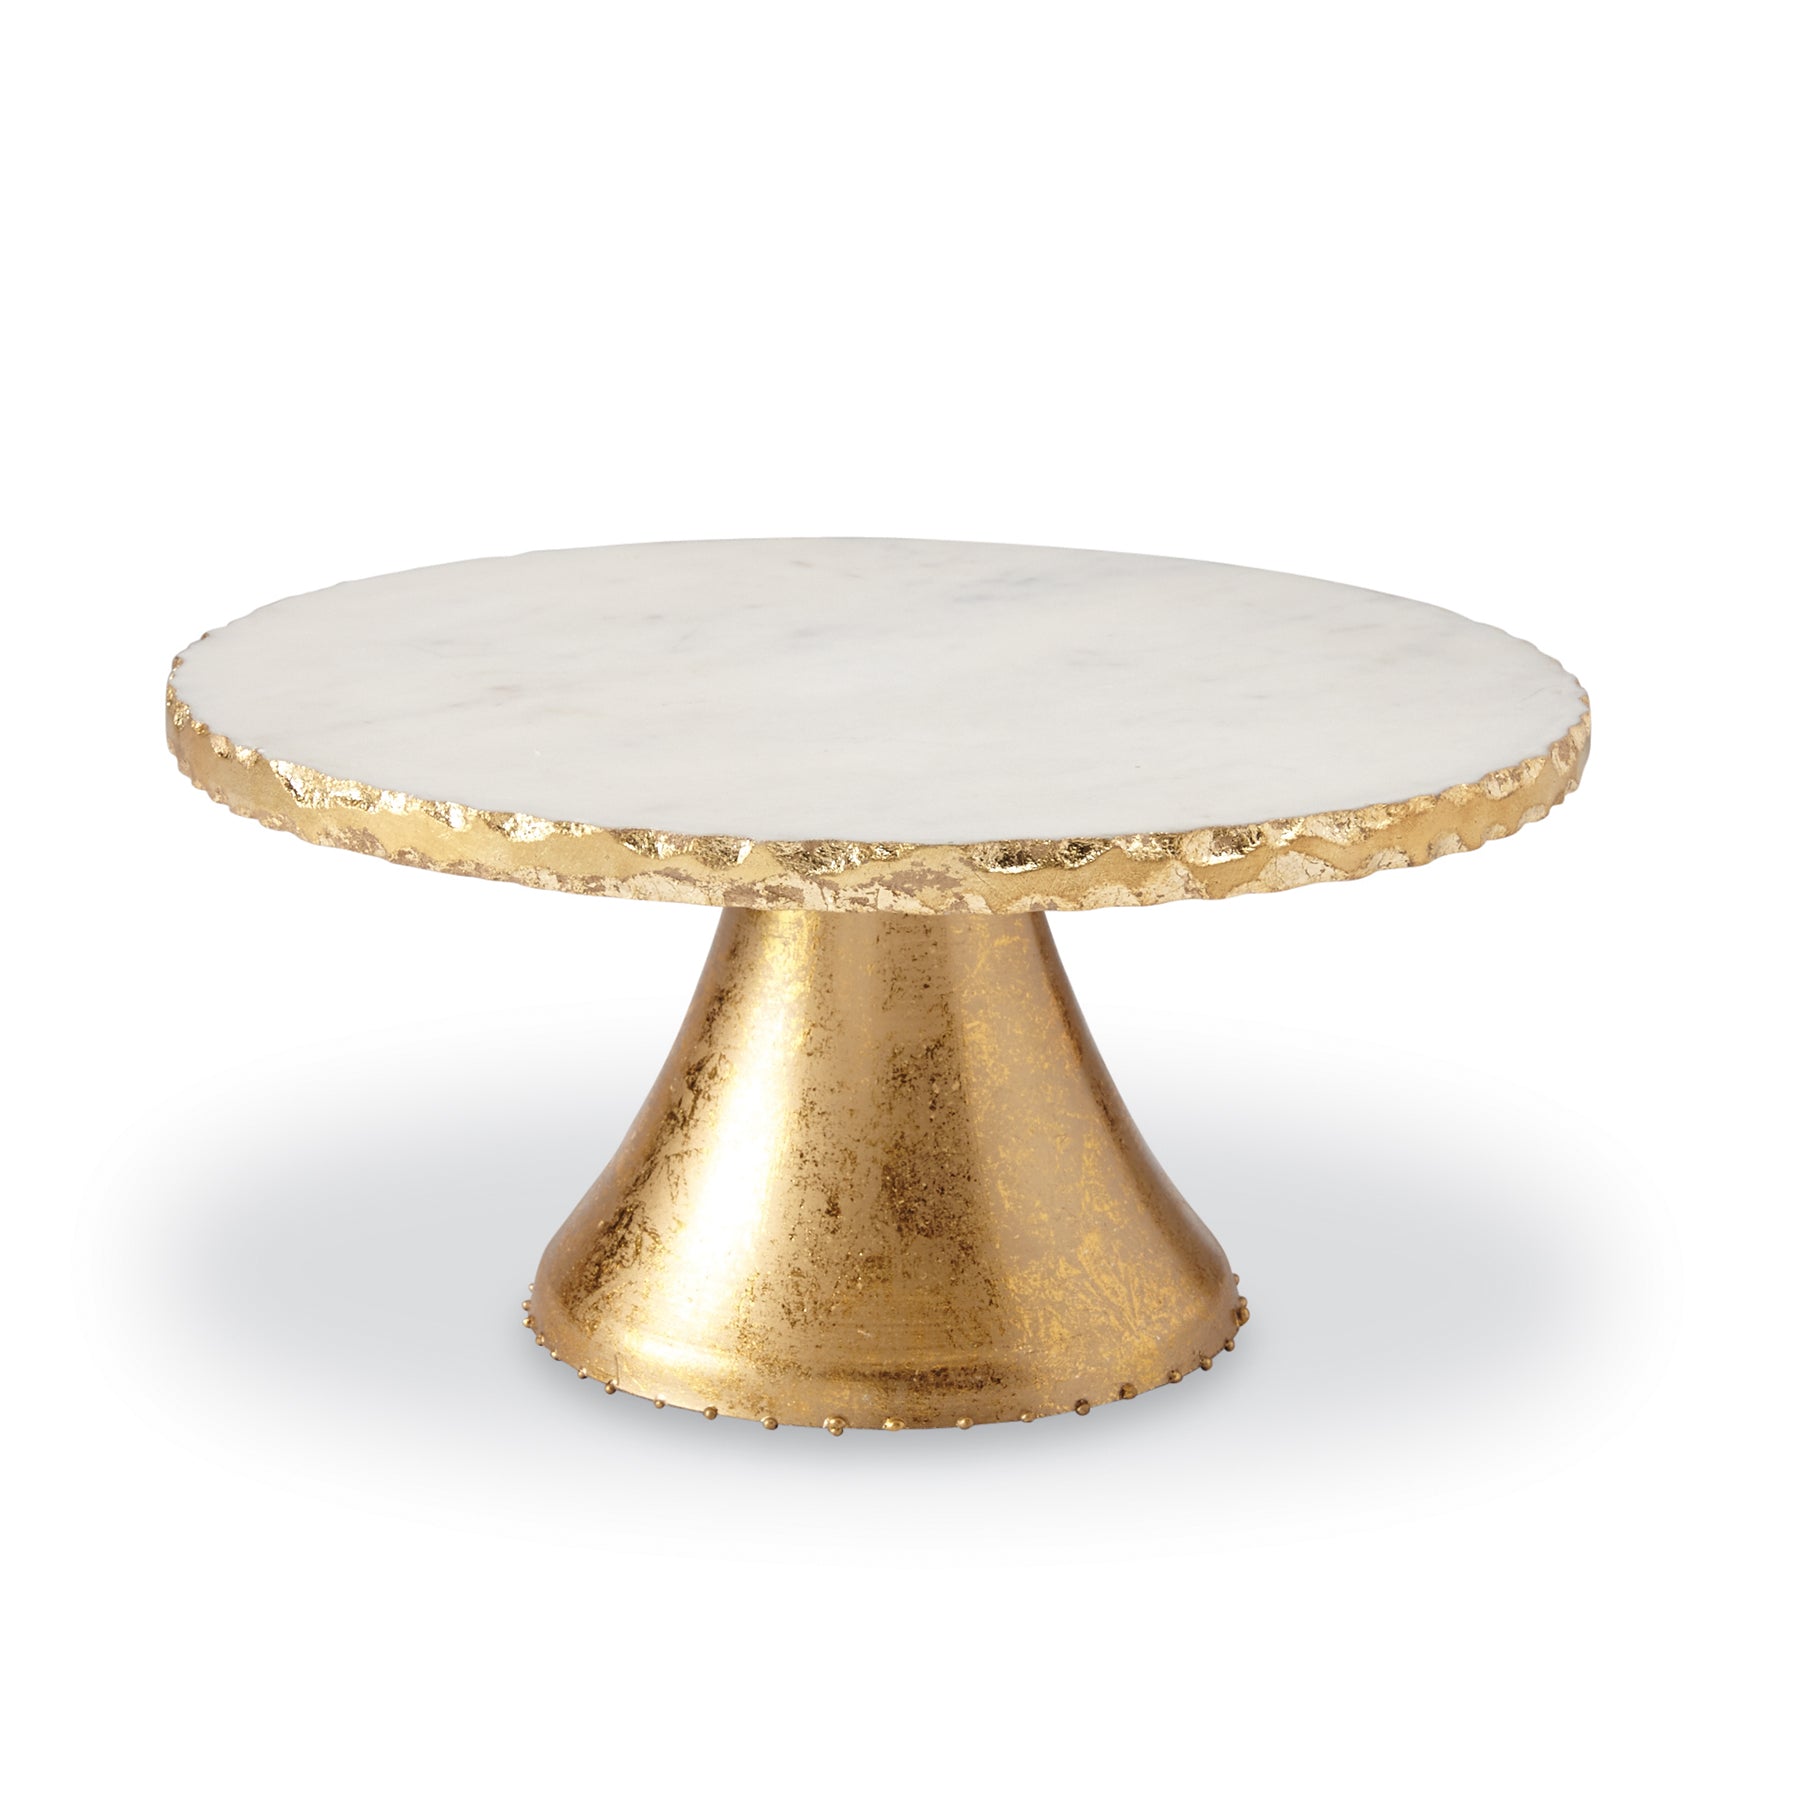 marble and golden cake stand on a white background